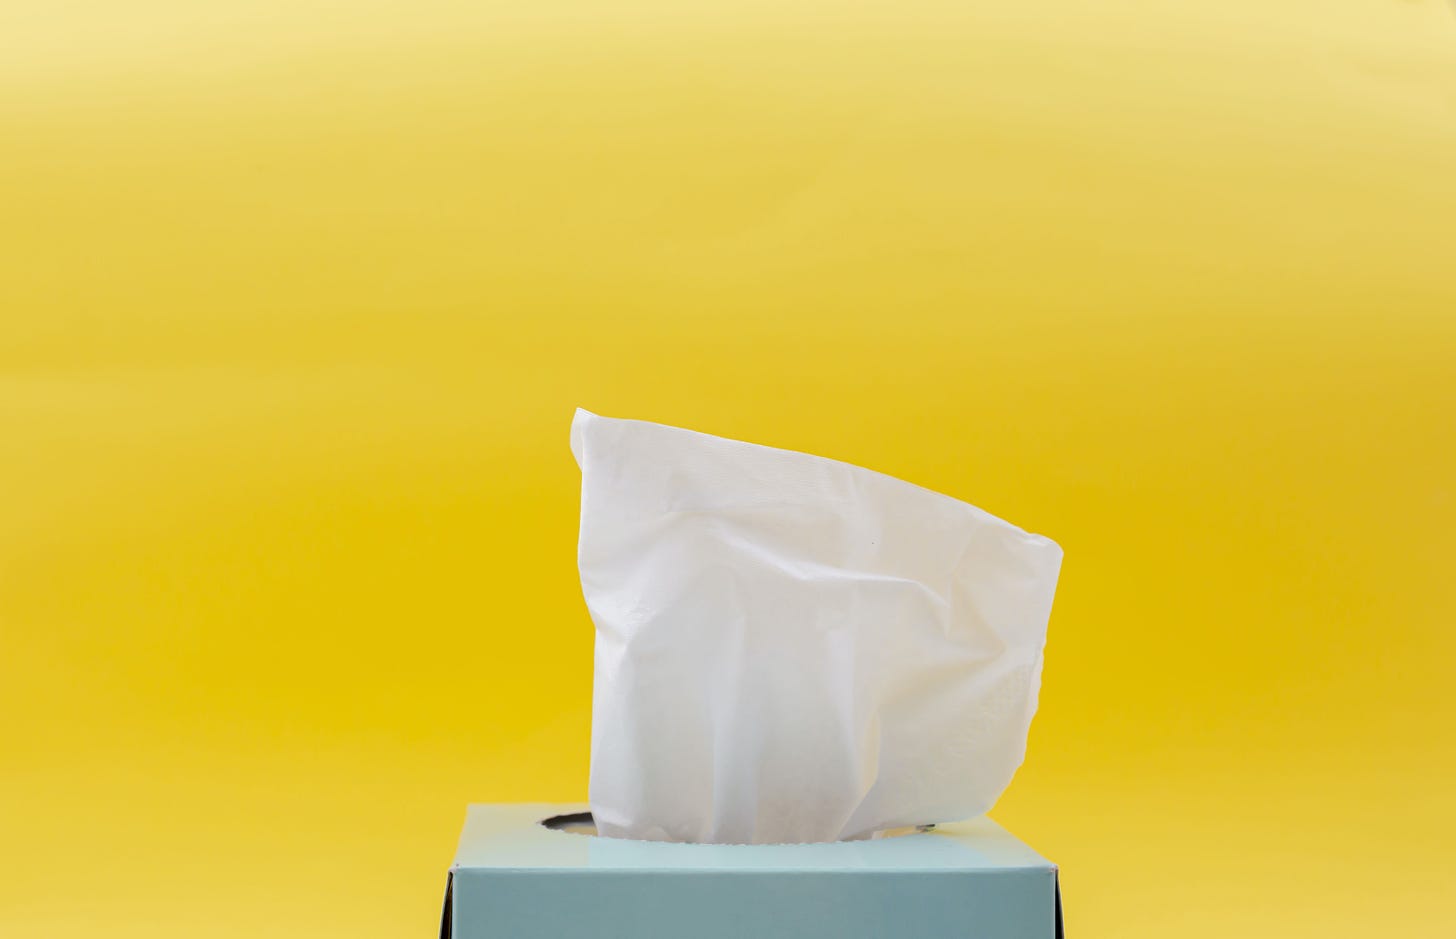 Blue tissue box on a yellow background